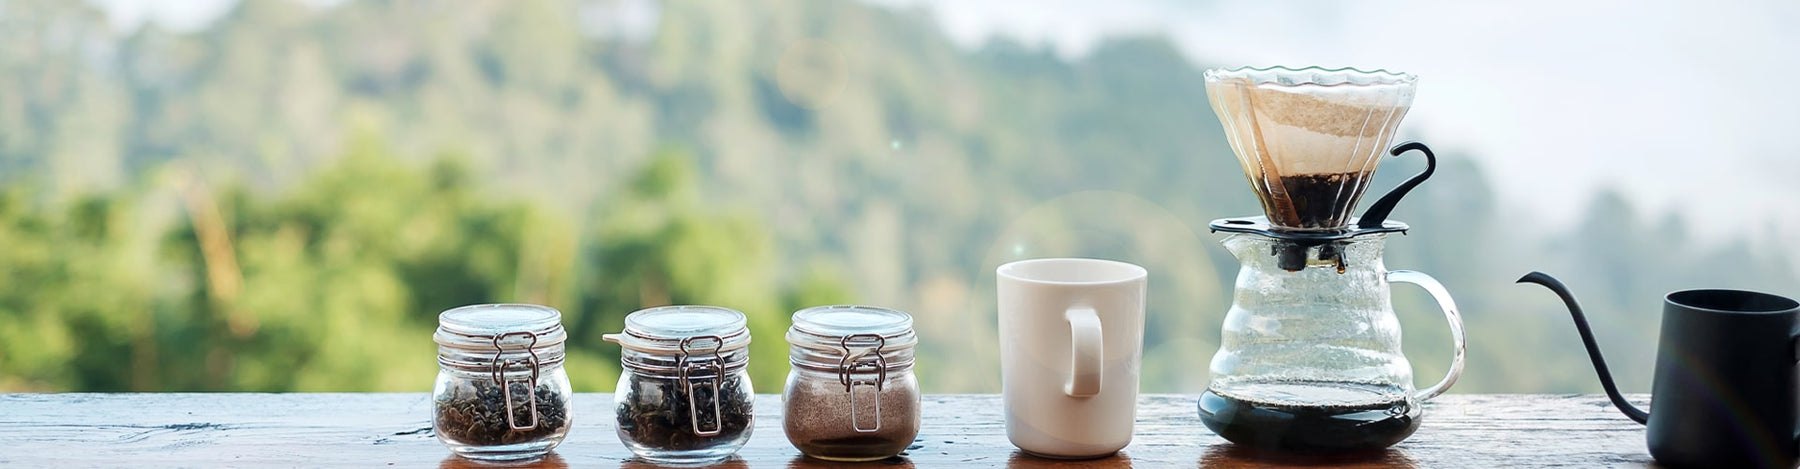 Glass storage jars with ingredients, coffee mug, and pourover